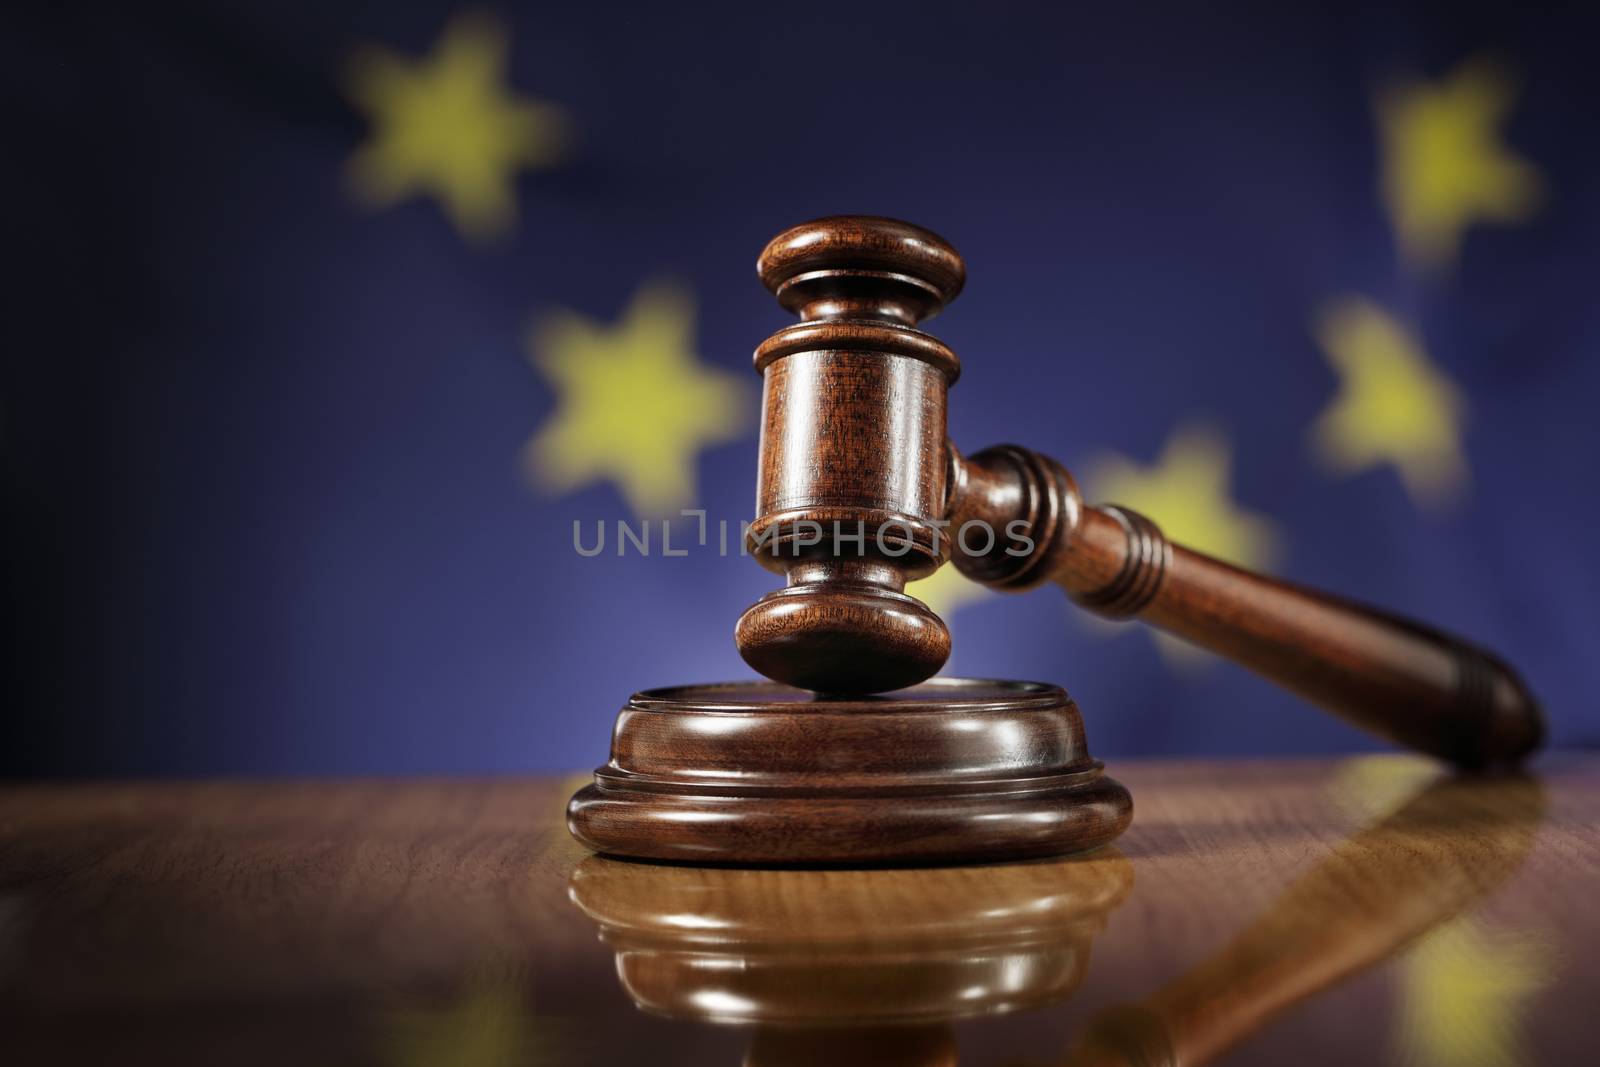 Mahogany wooden gavel on glossy wooden table. Flag of European Union, EU,  in the background.